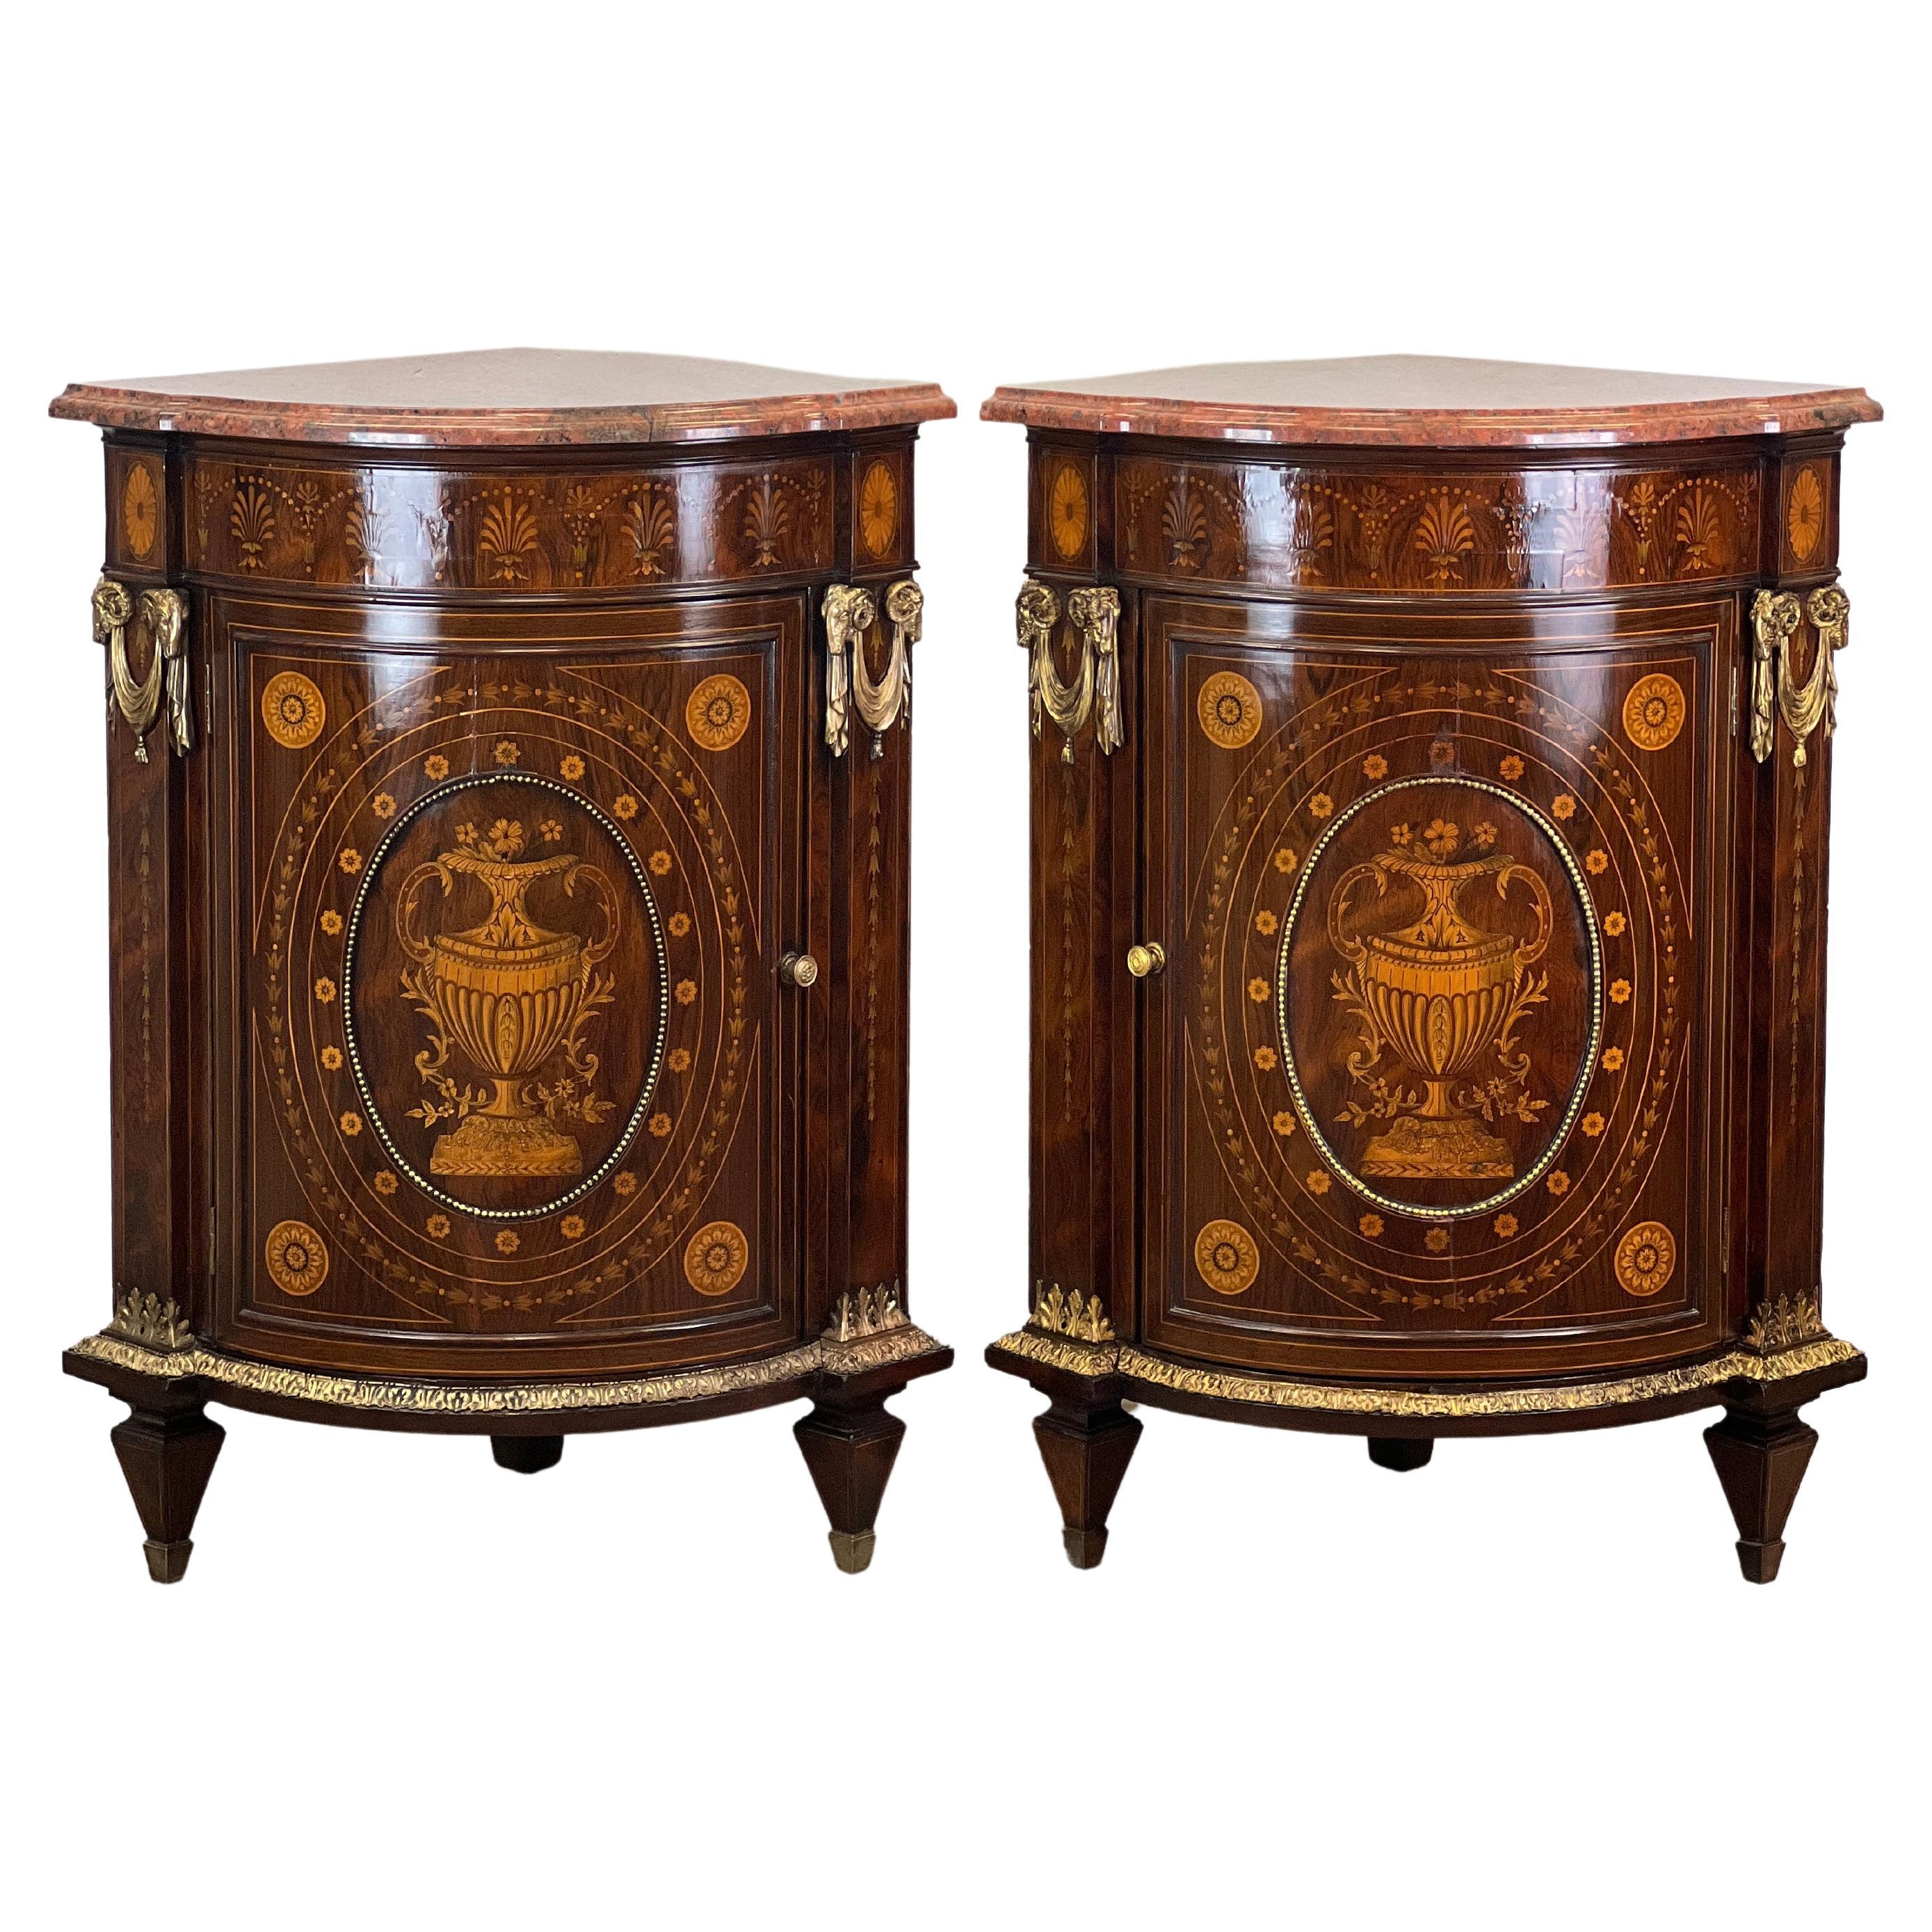 Pair of French Napoleon III NeoClassical Rosewood Encoignures